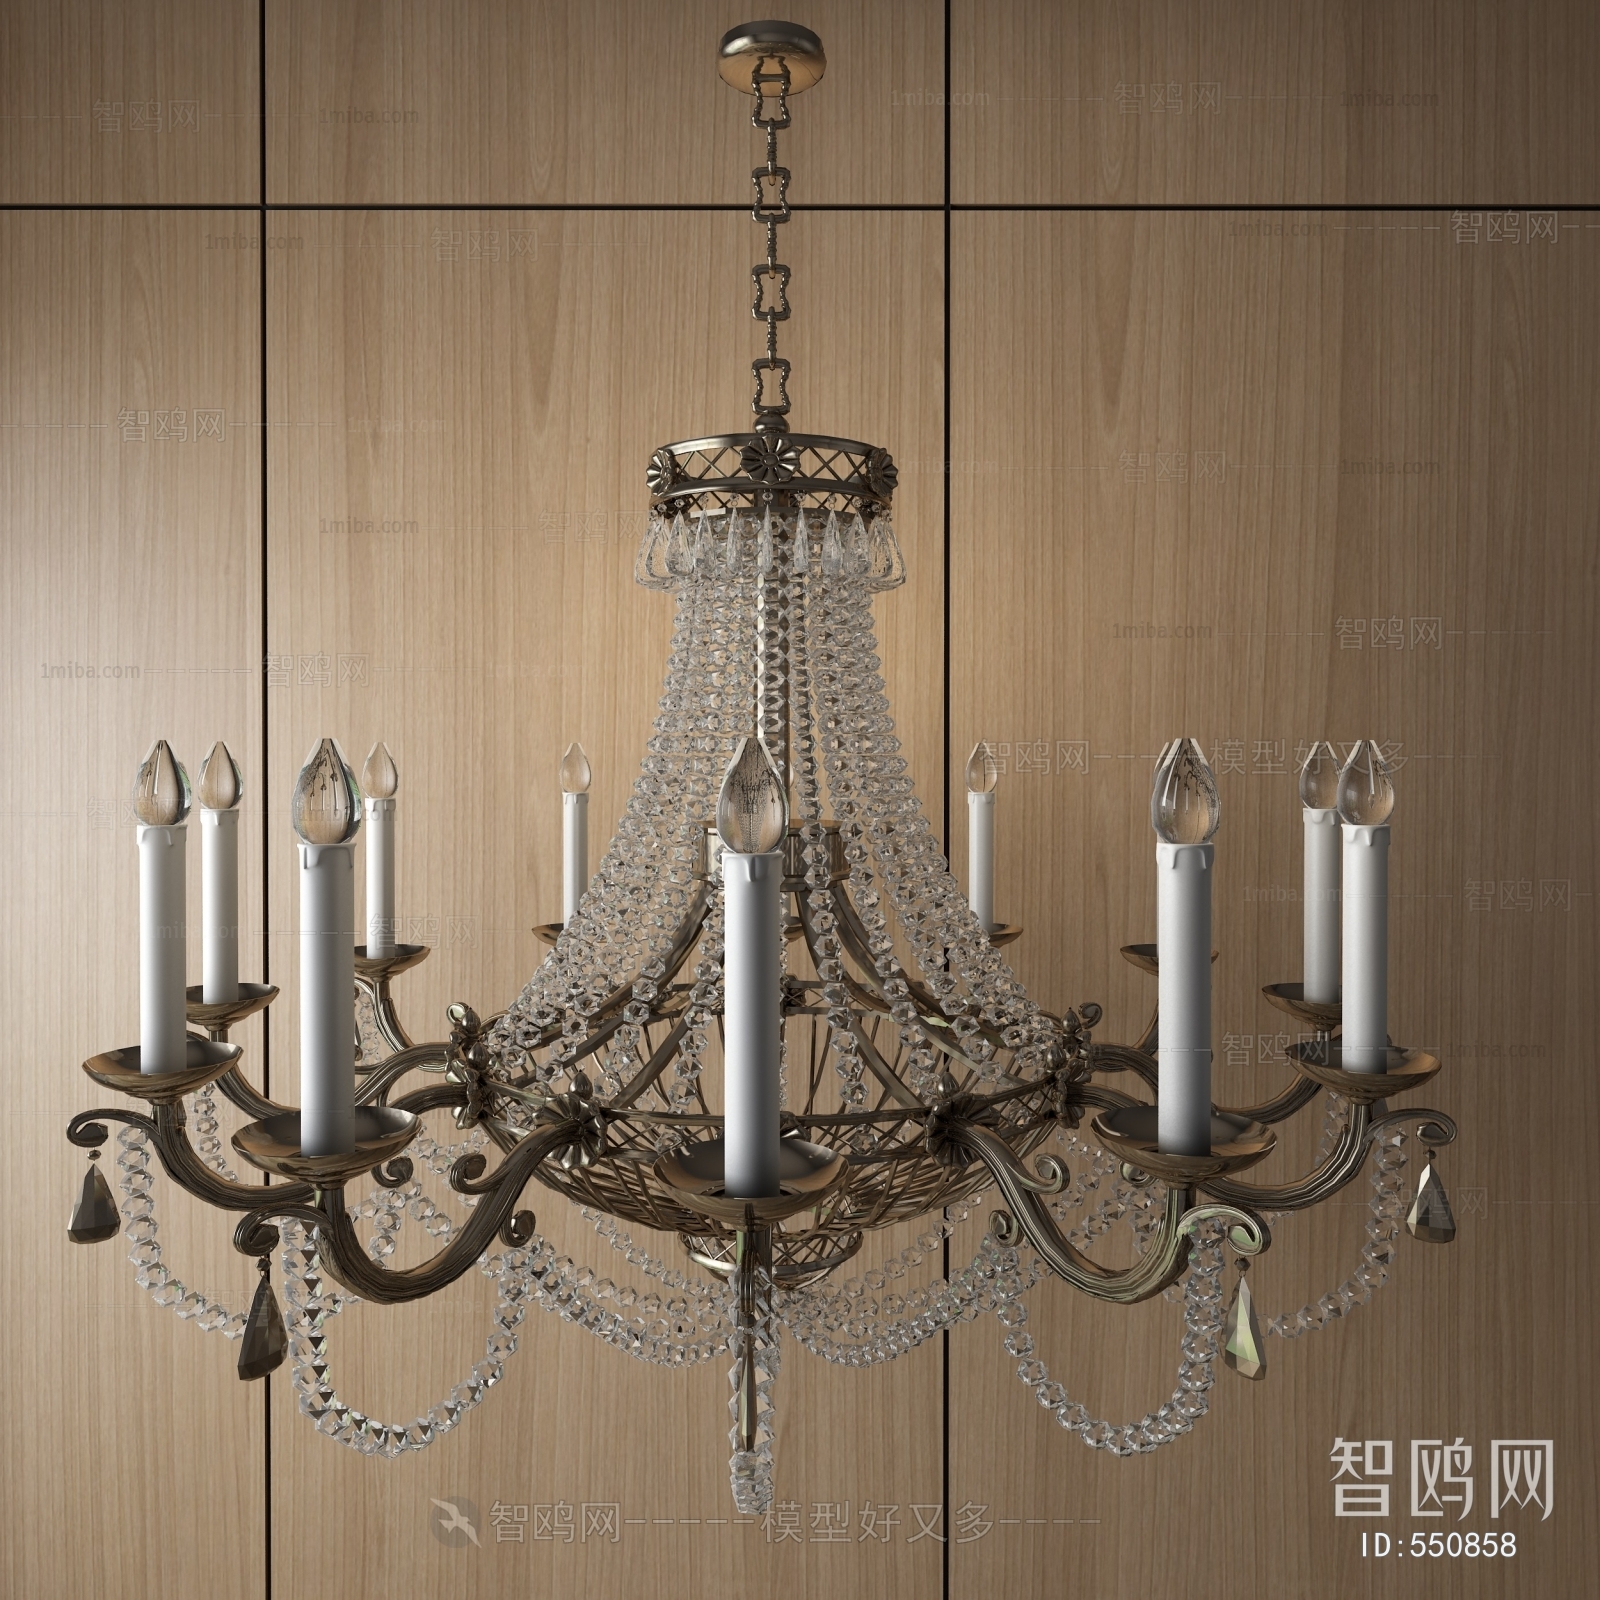 Classical Style Droplight